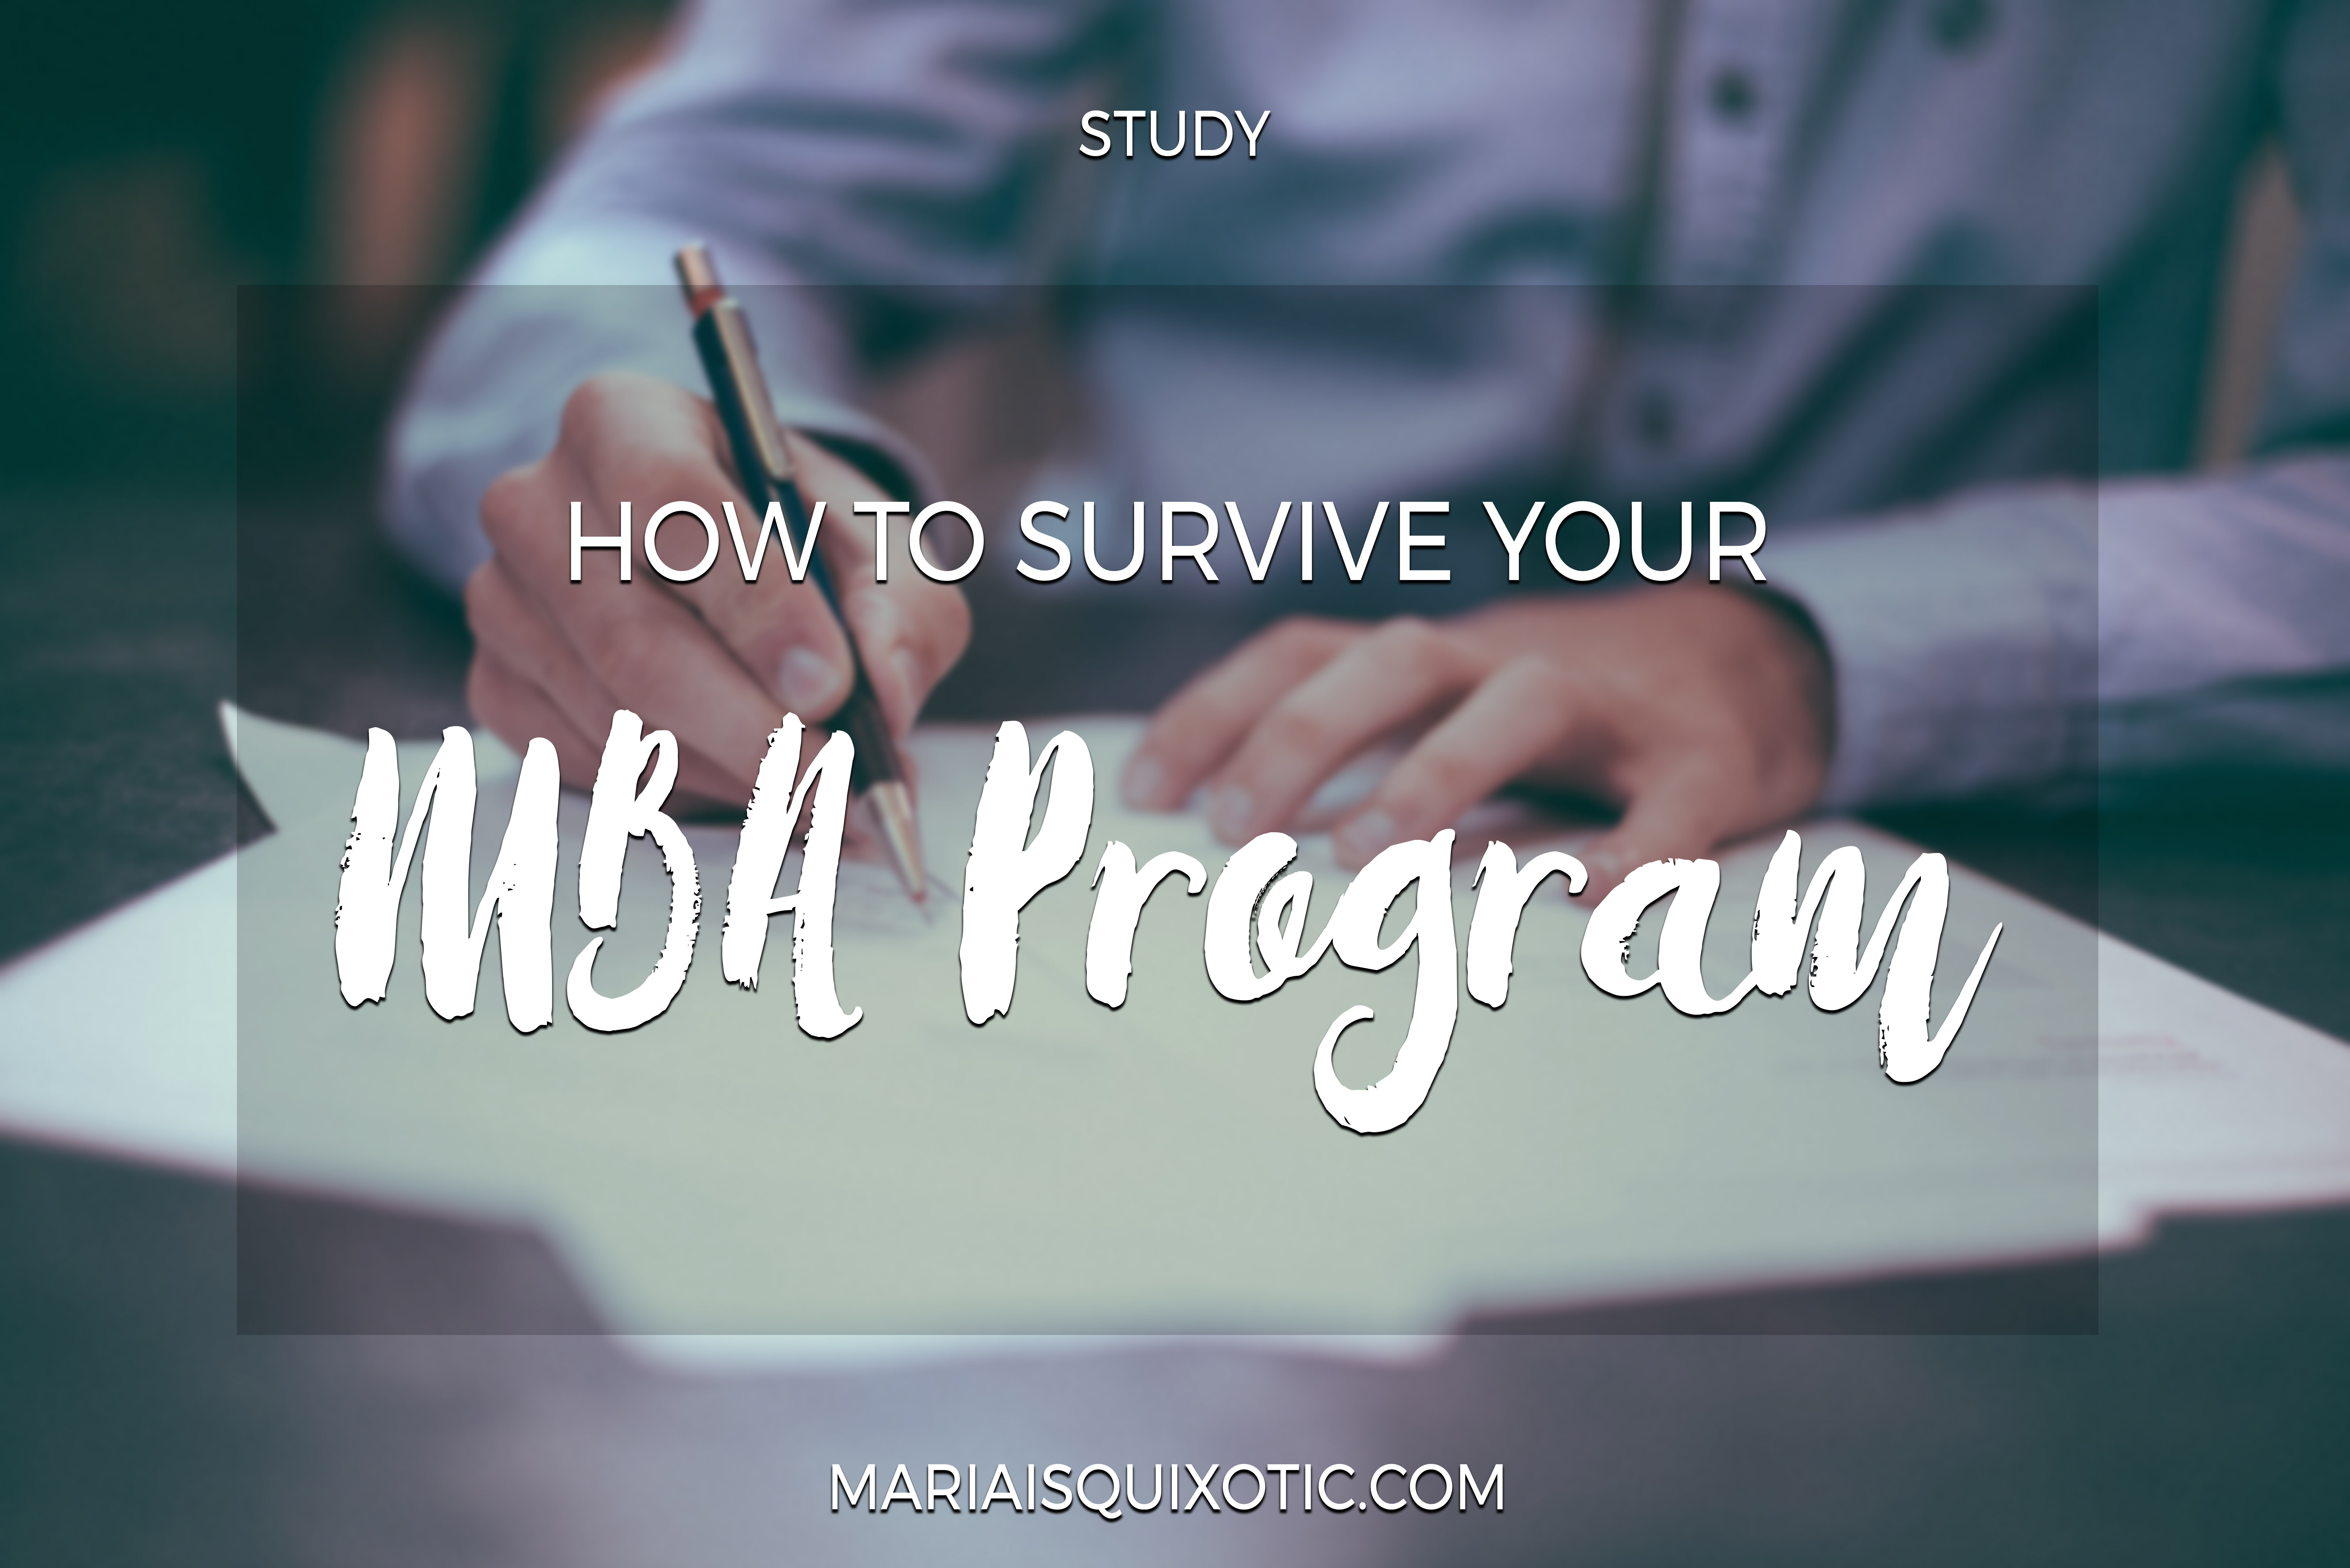 How to survive your MBA Program